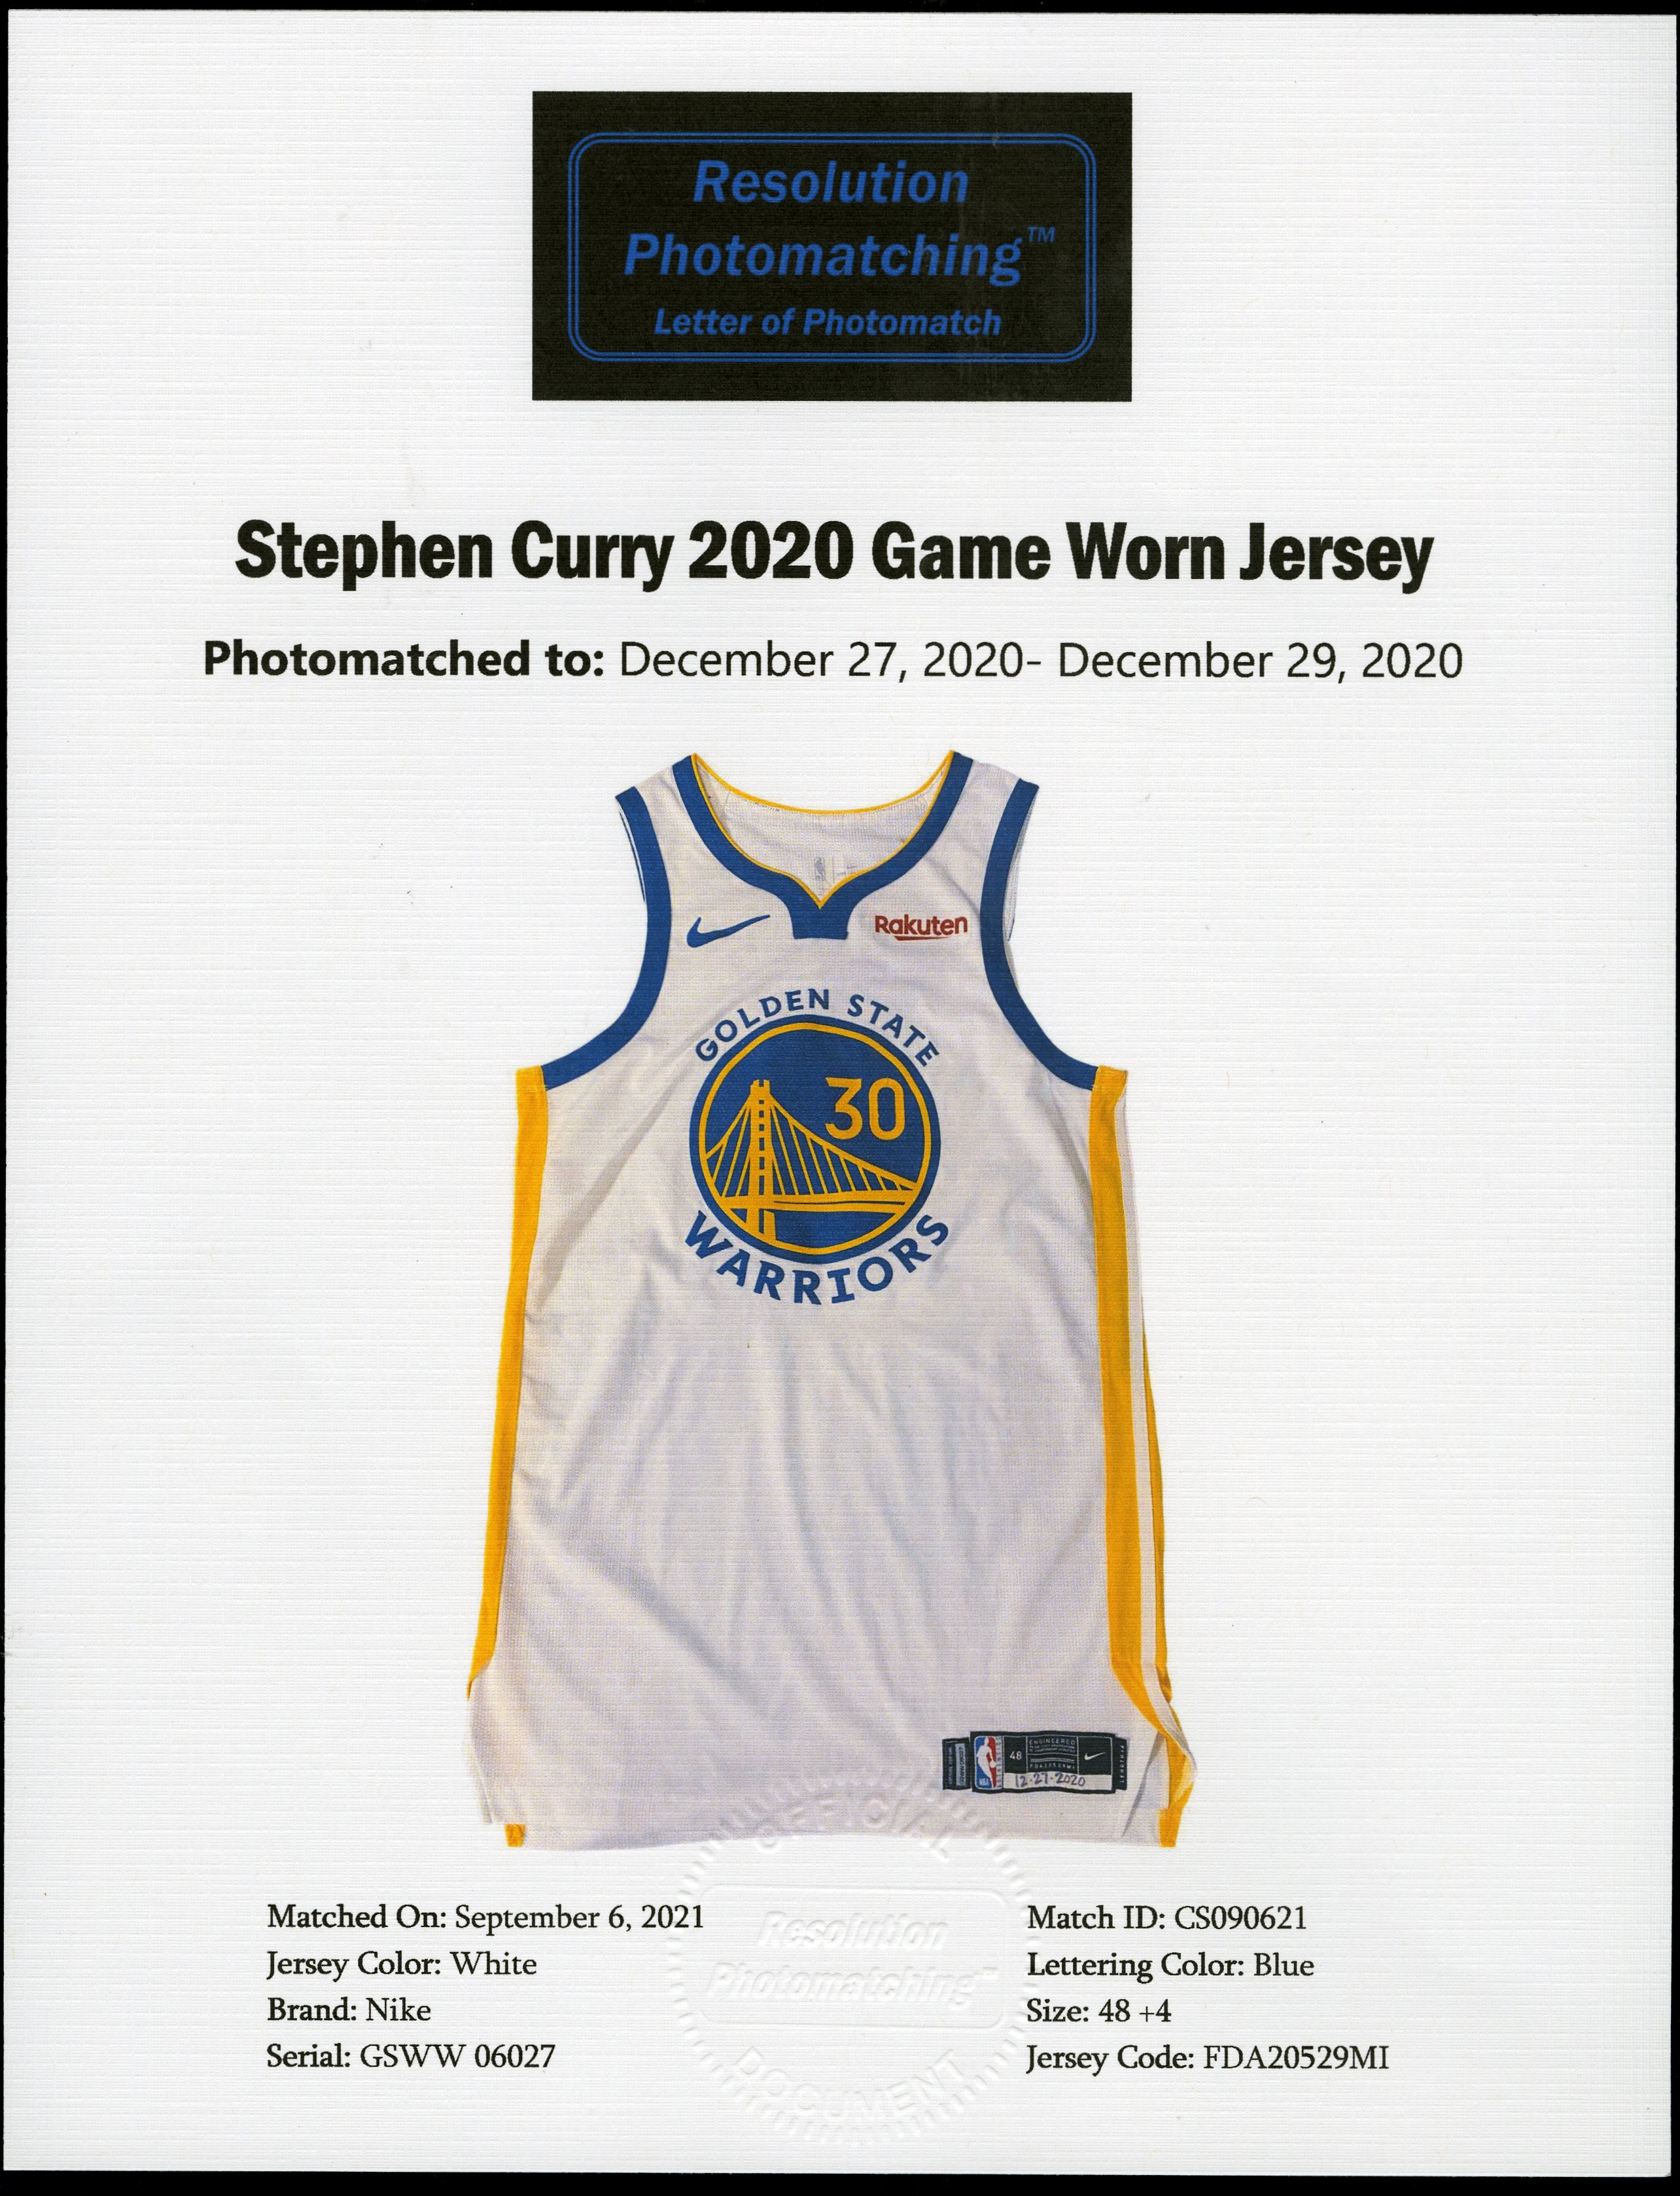 Sell or Auction a Steph Curry Game Worn Golden State Warriors Jersey